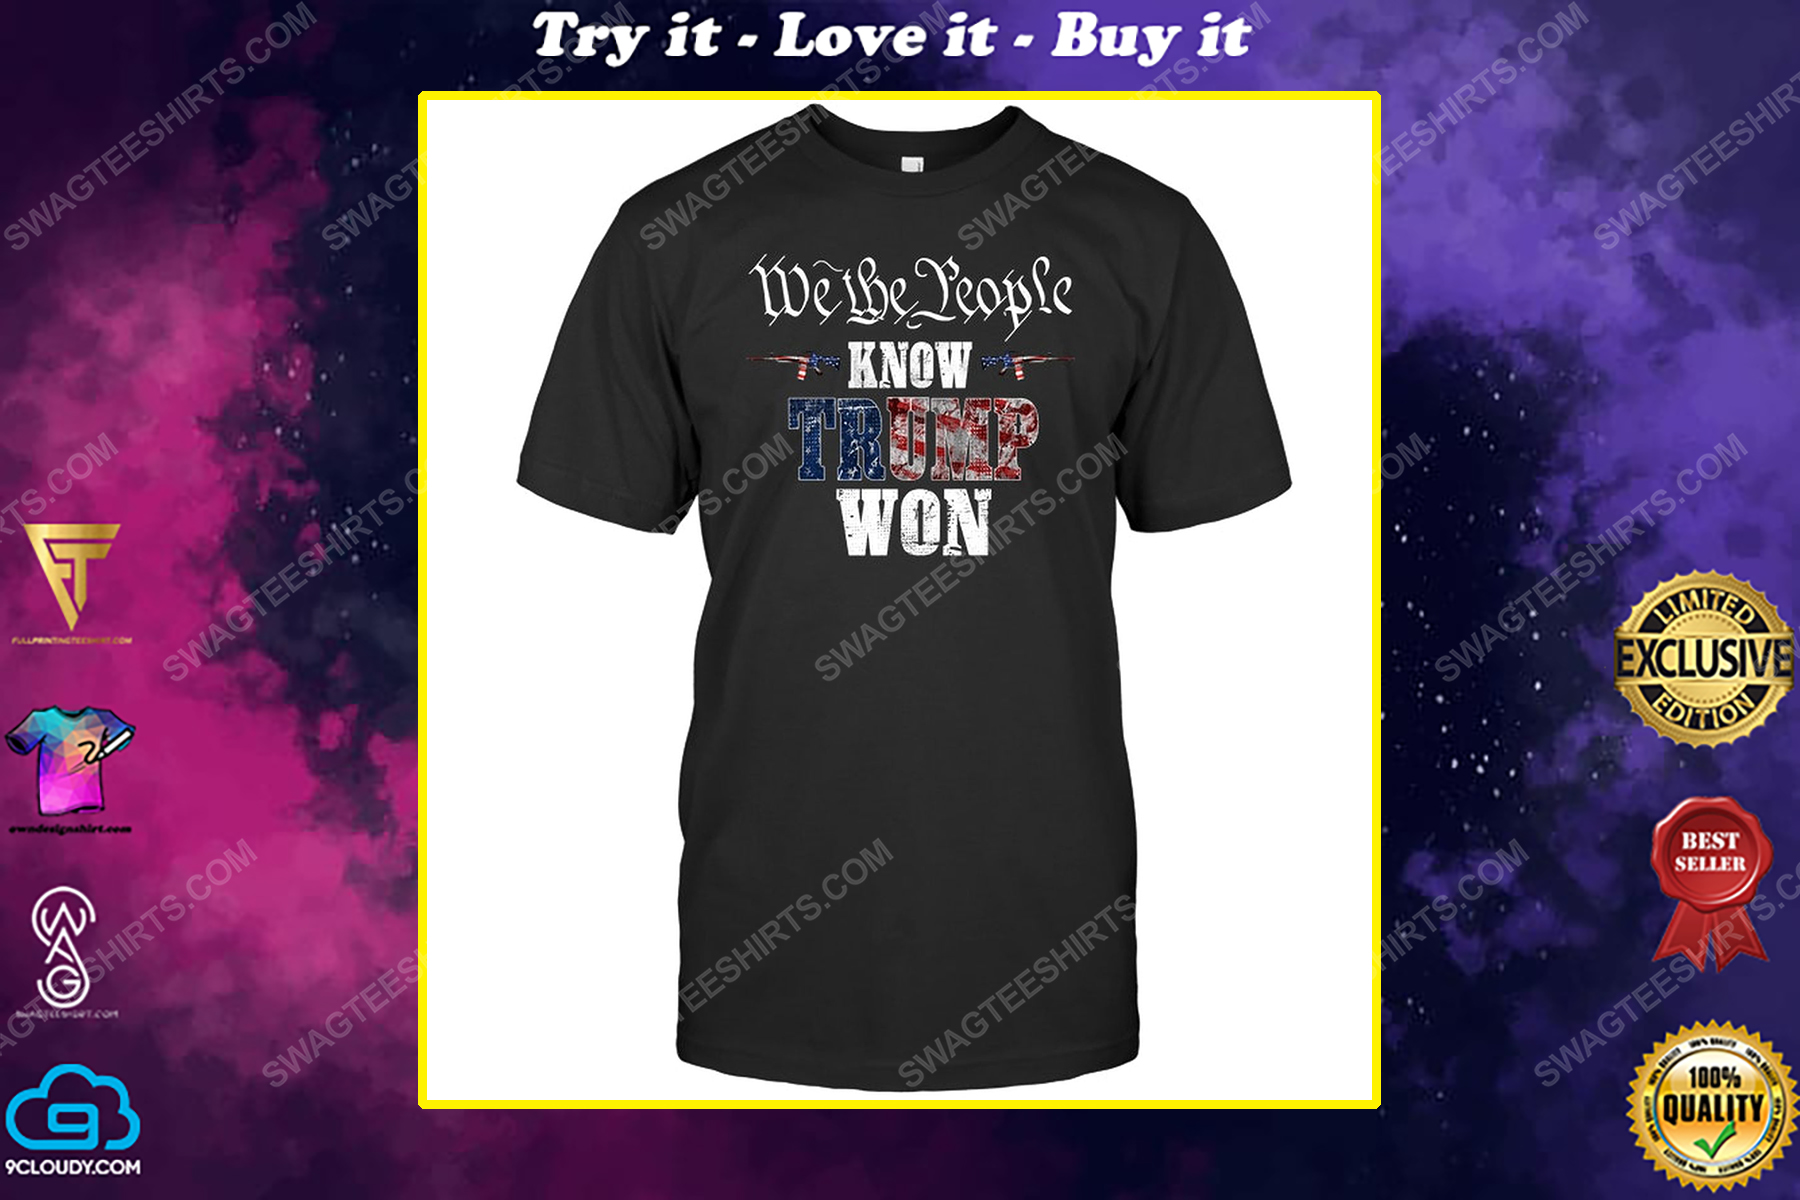 We the people know trump won political shirt